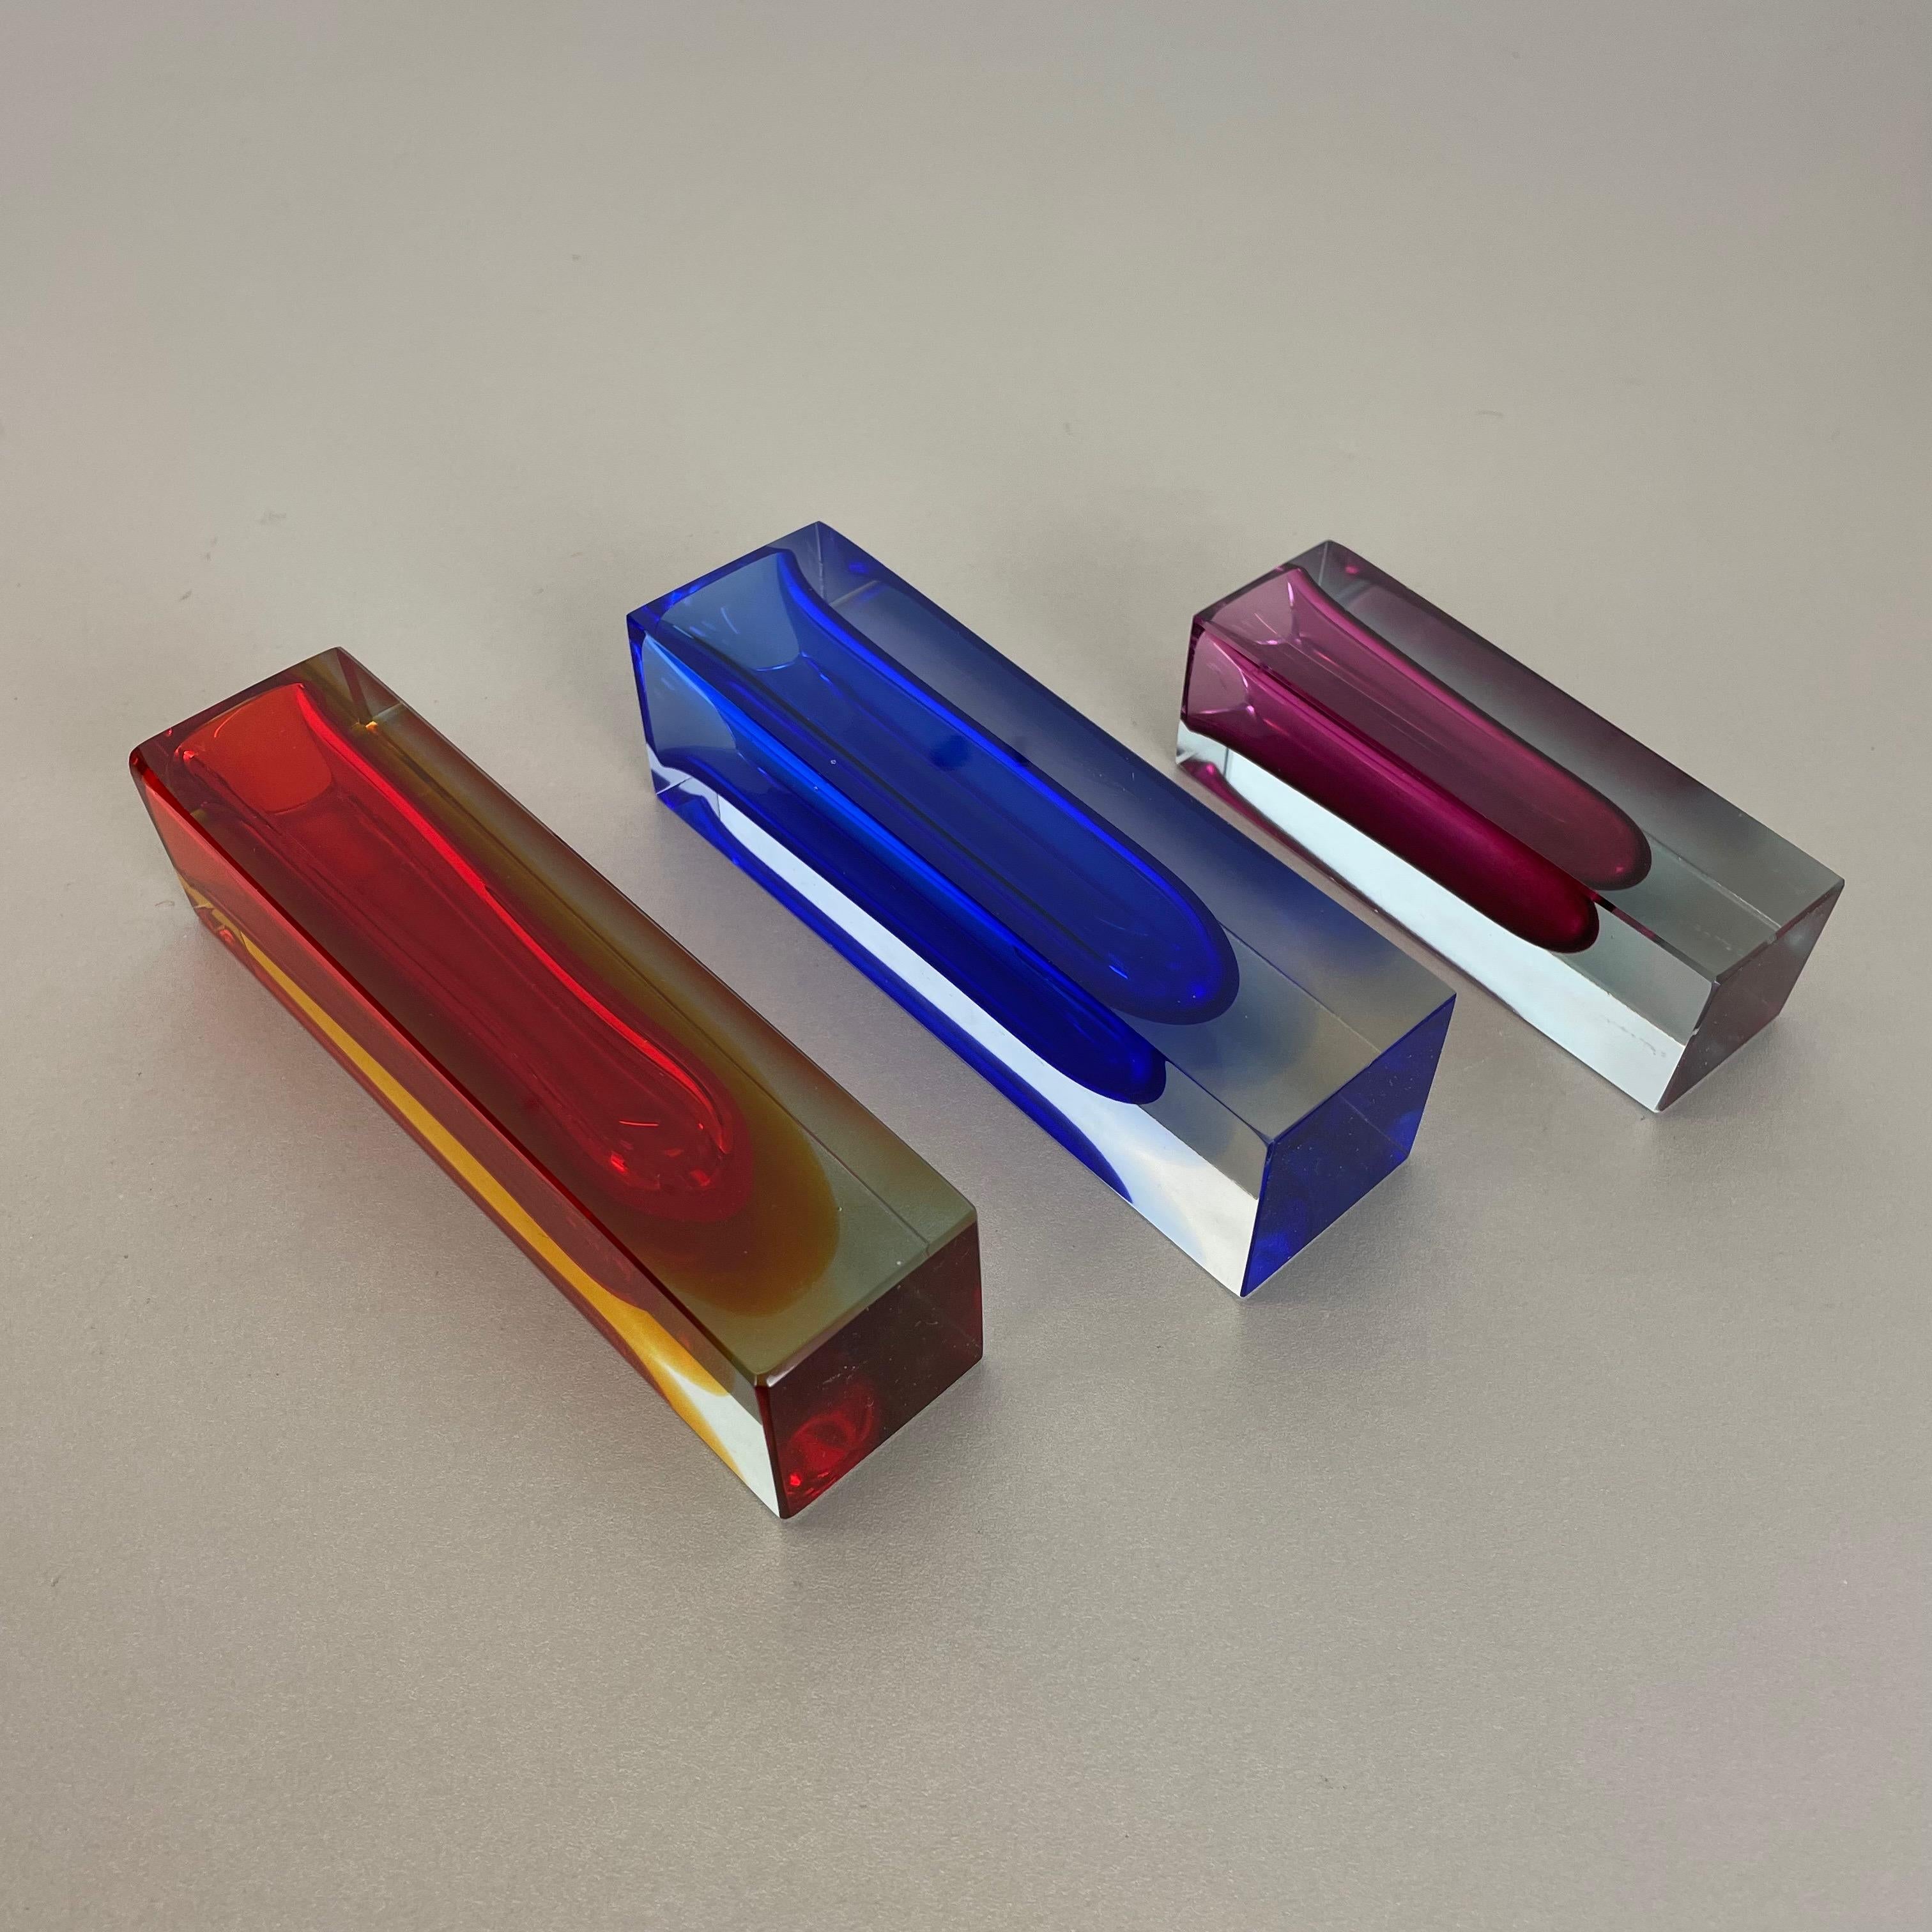 Rare Set of 3 Multicolor Faceted Murano Glass Sommerso Cube Vases, Italy, 1970s For Sale 5